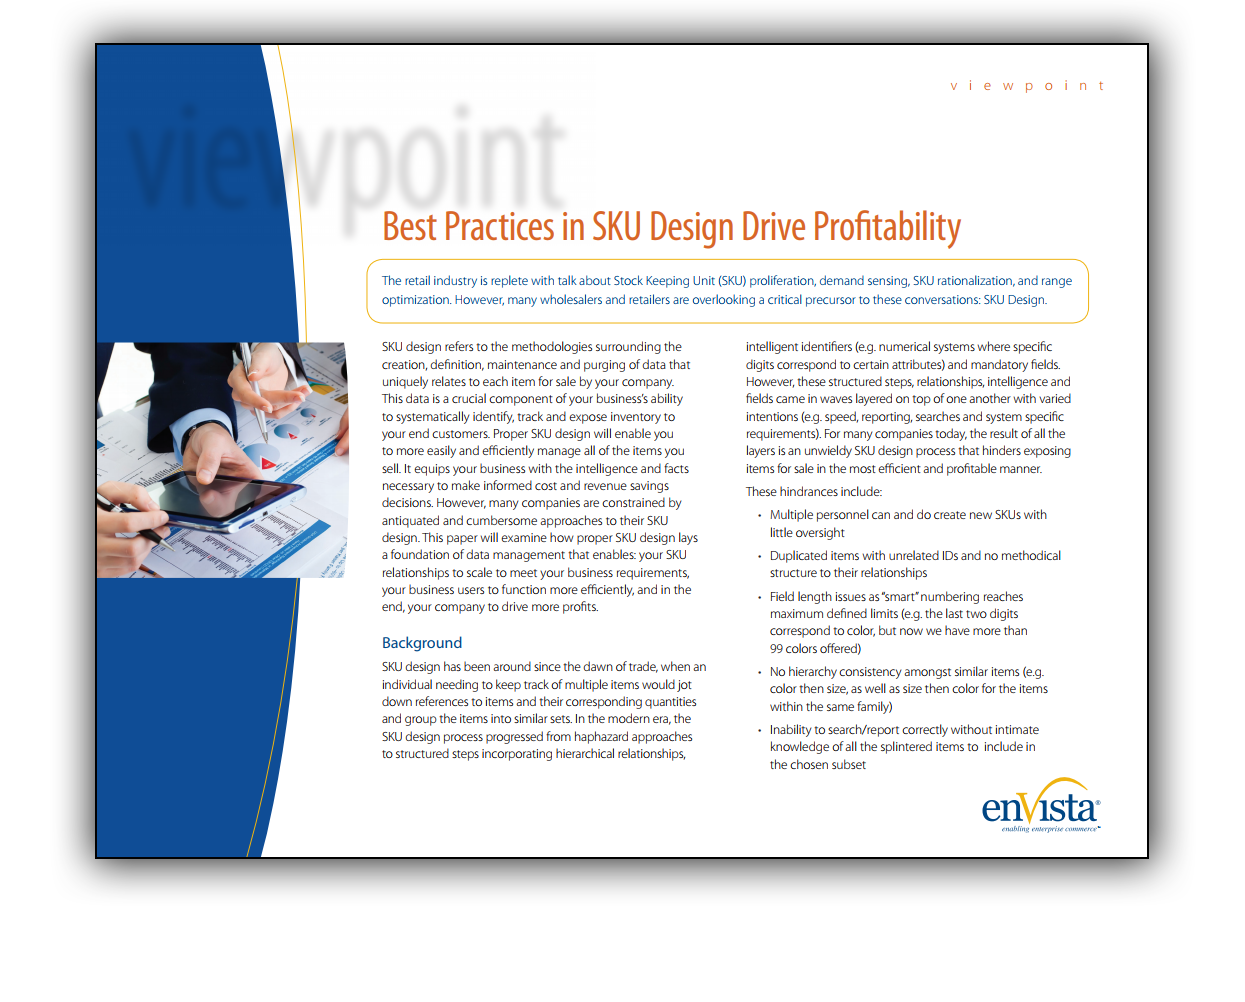 Image_best-practices-in-sku-design-drive-profitability.png